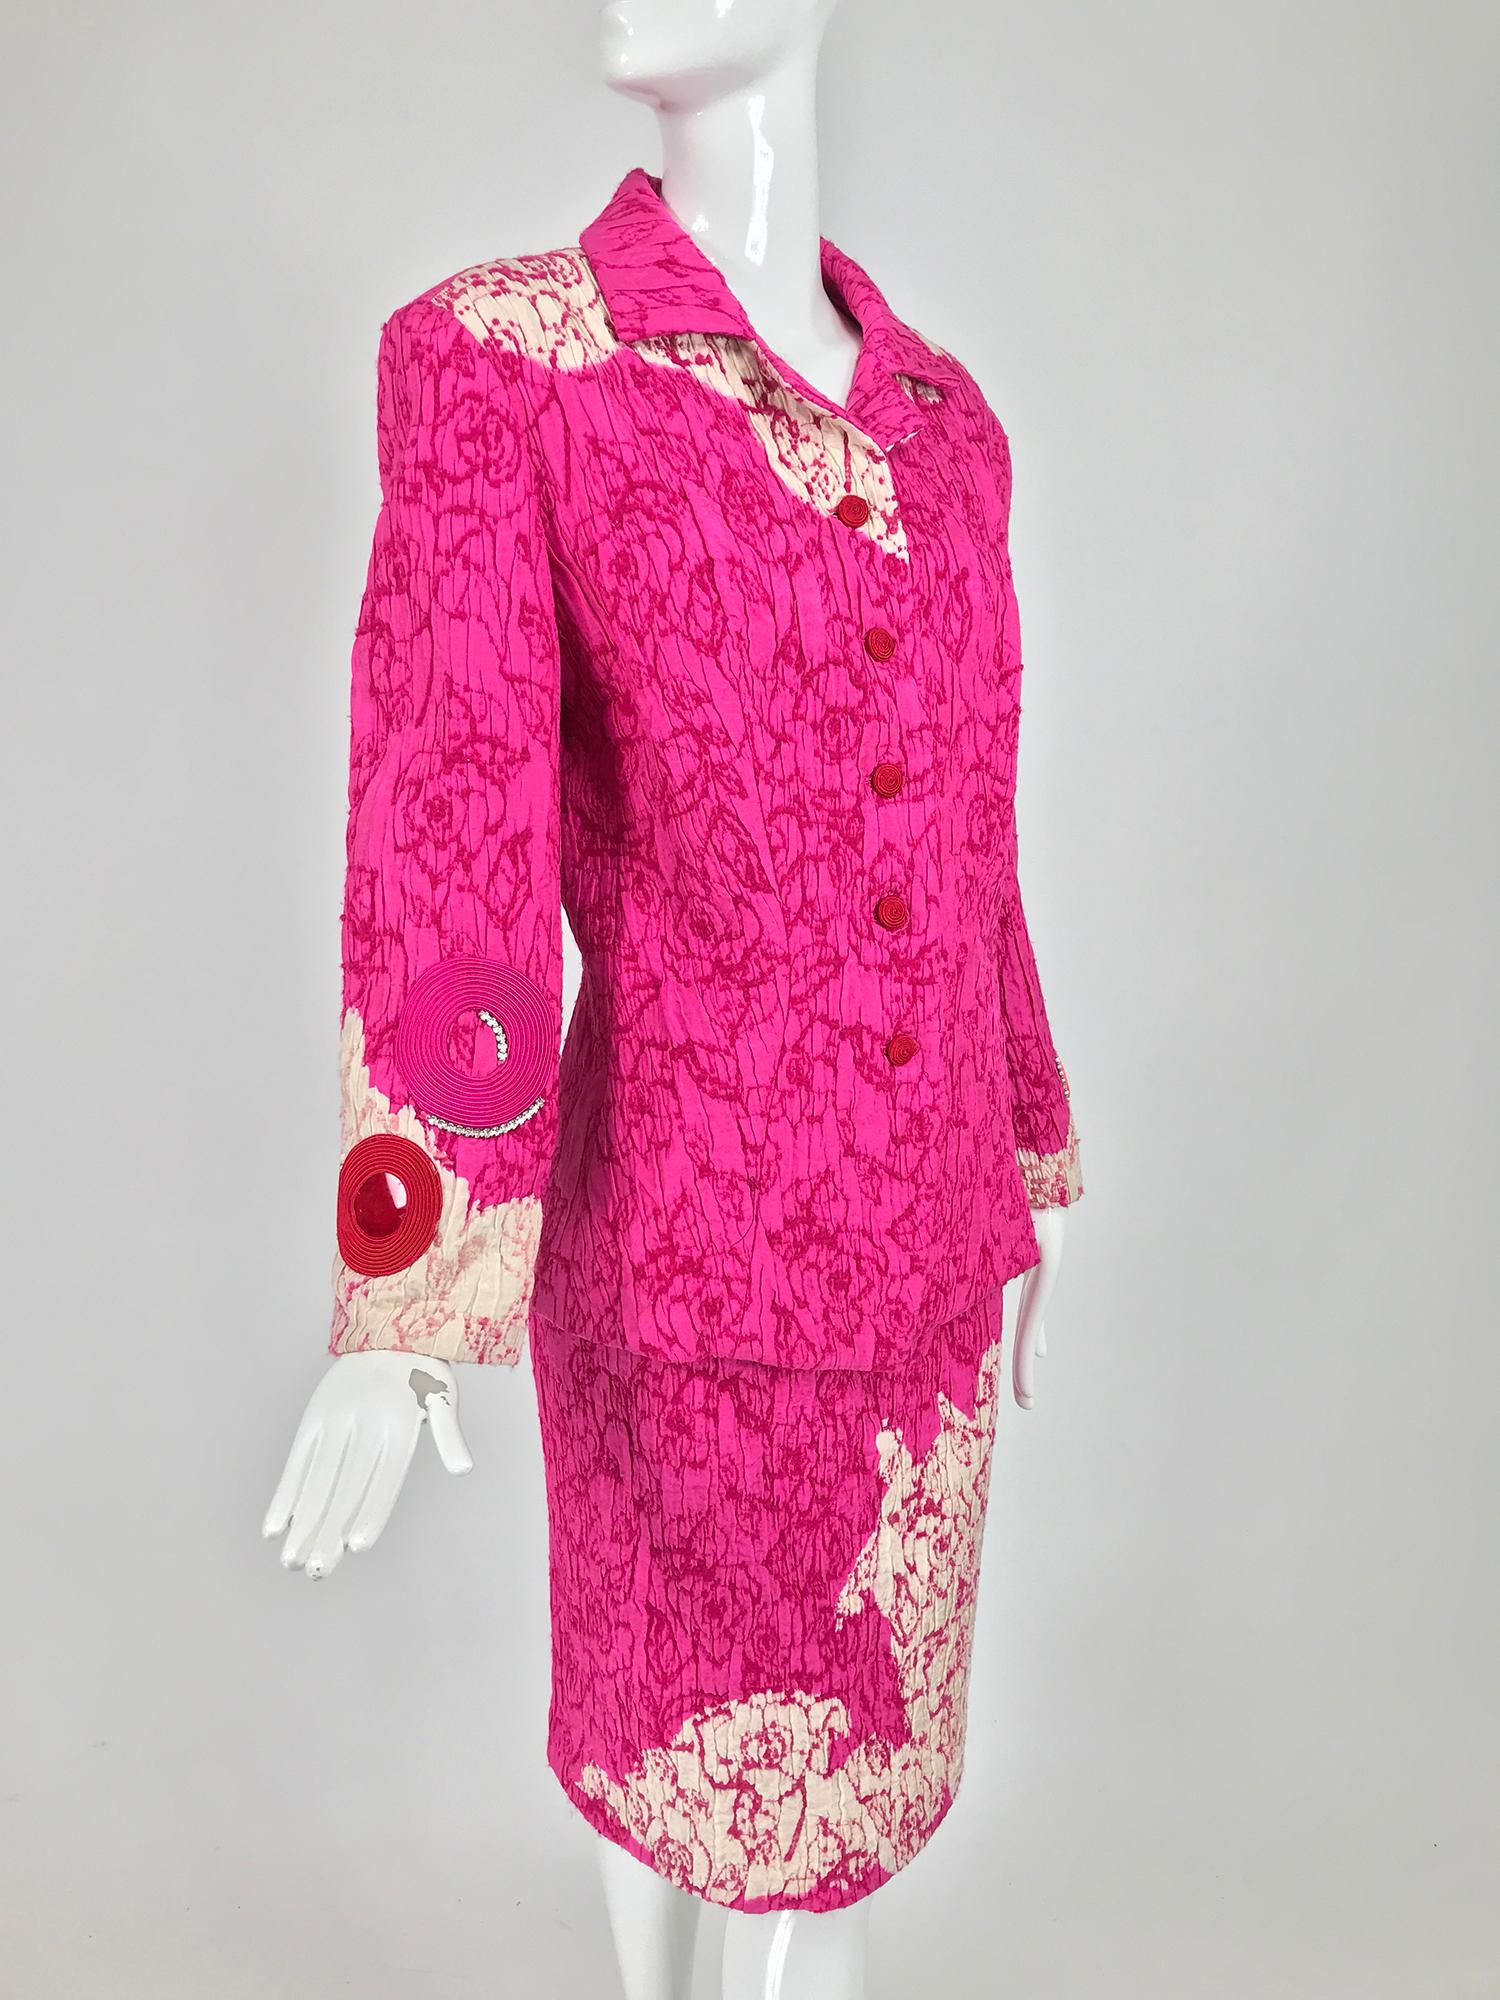 Christian Lacroix Pink Embroidered Silk Applique Skirt Suit 1990s For Sale 1